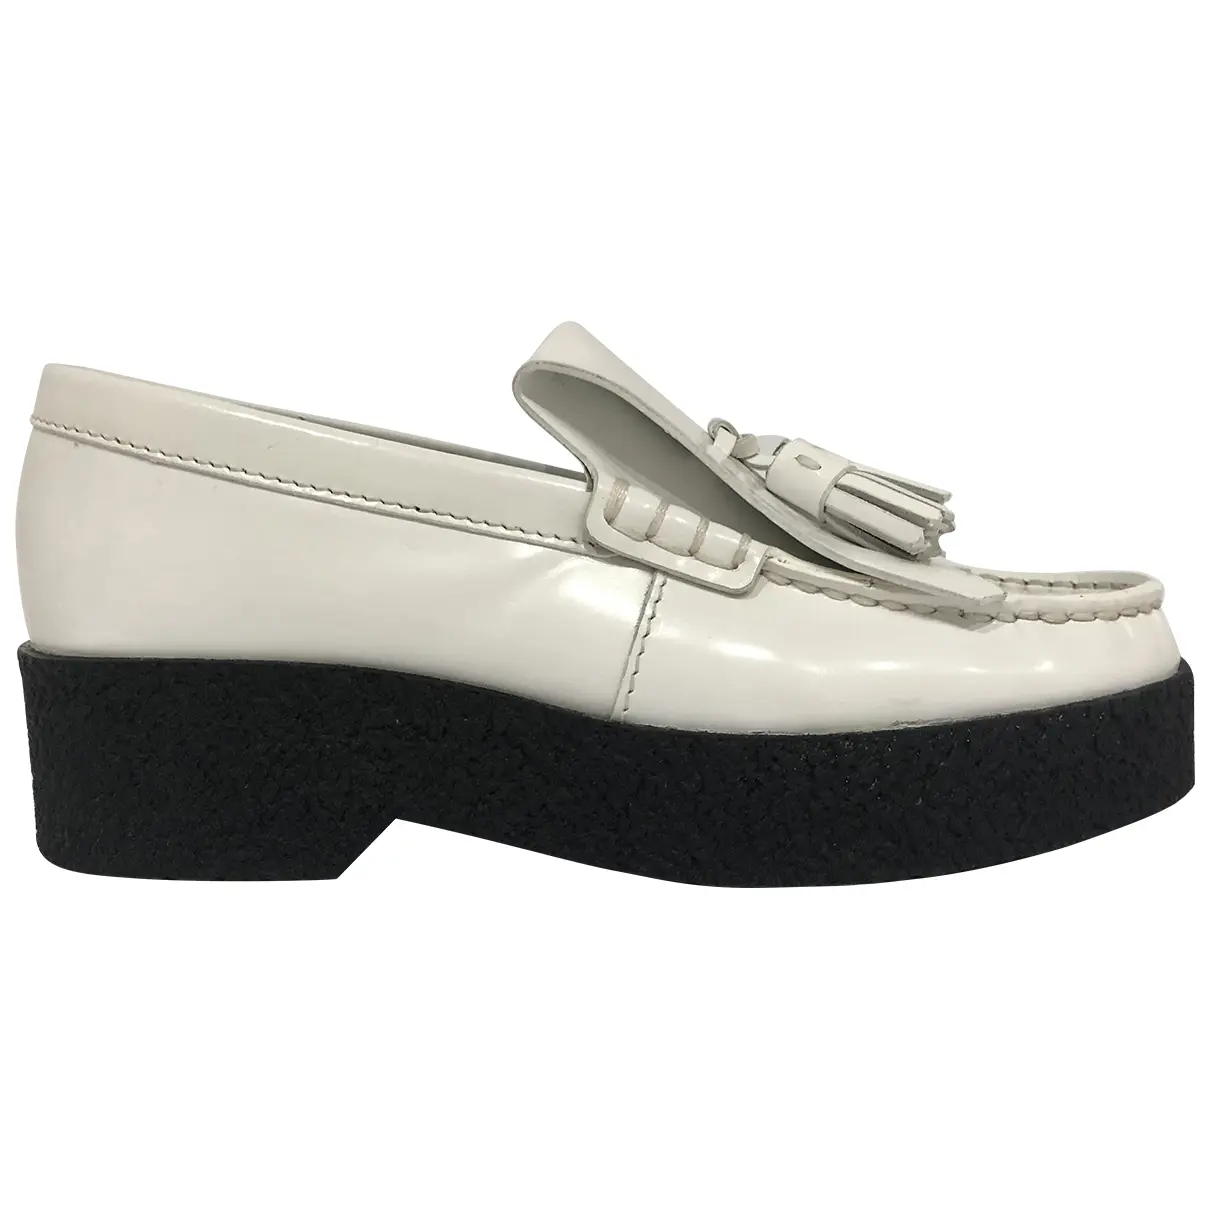 Luco patent leather flats Celine